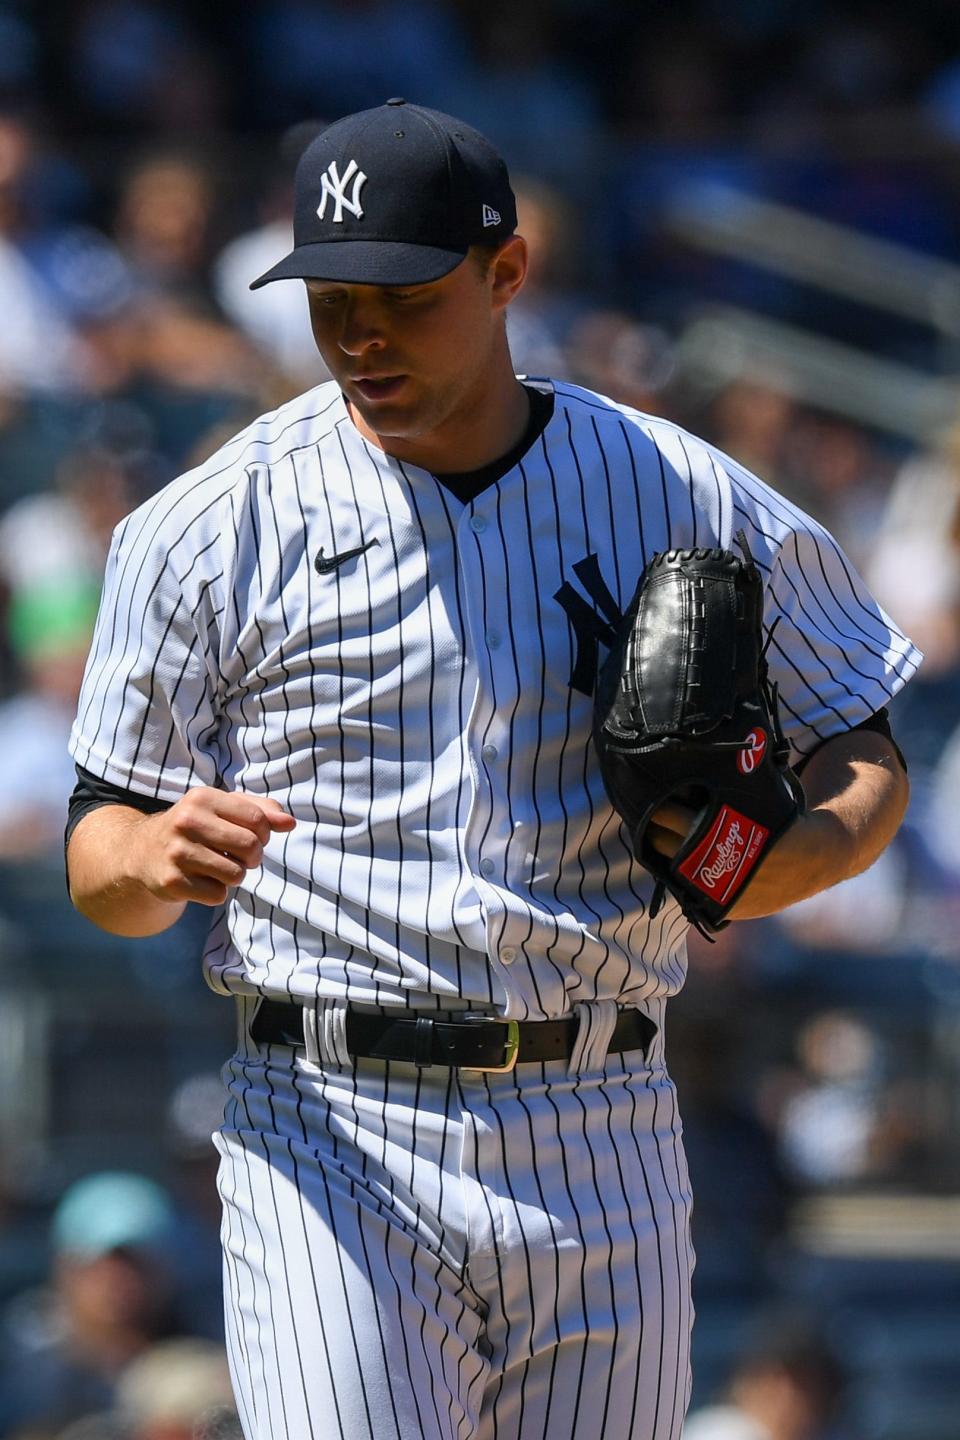 Yankees starting pitcher Michael King celebrates after striking out the final batter in the 10th inning of the game against the Detroit Tigers on June 5 at Yankee Stadium.